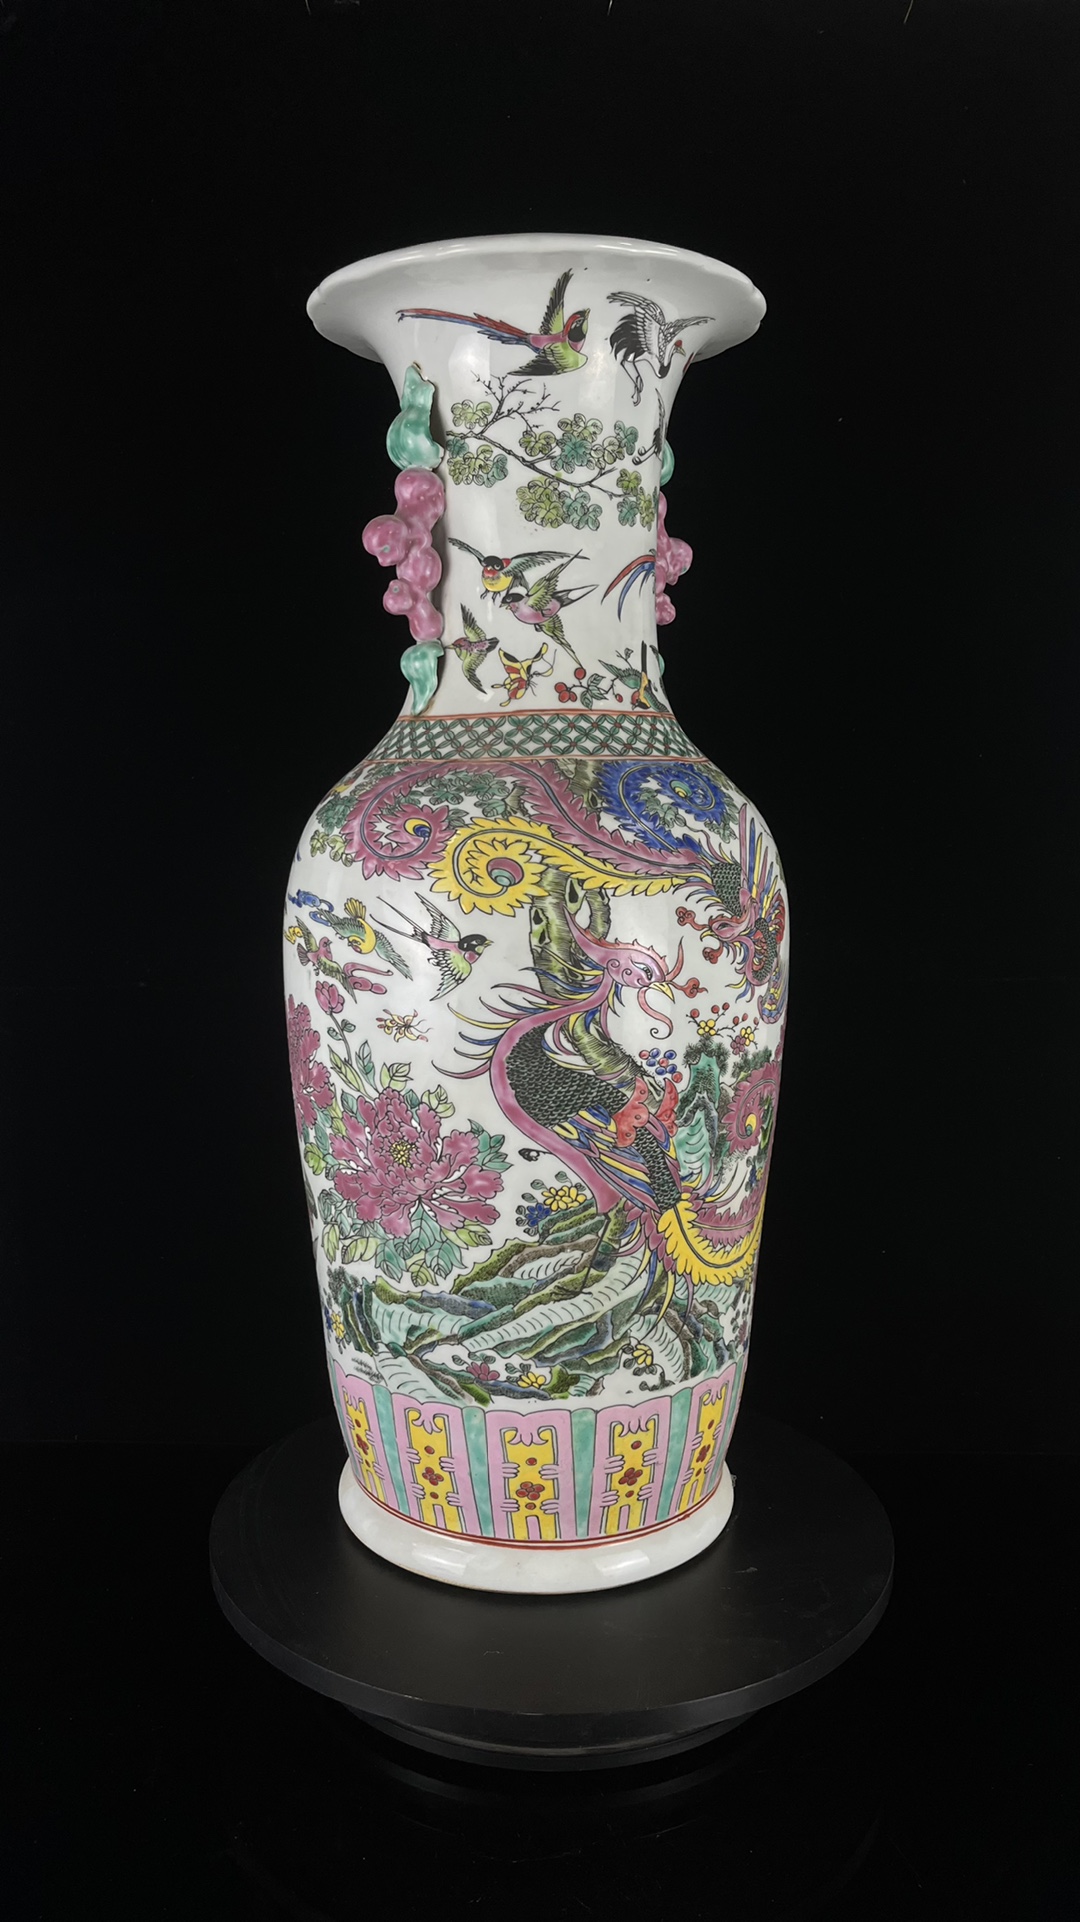 Large flower and bird vase made in the Kangxi period of the Qing Dynasty - Image 7 of 9